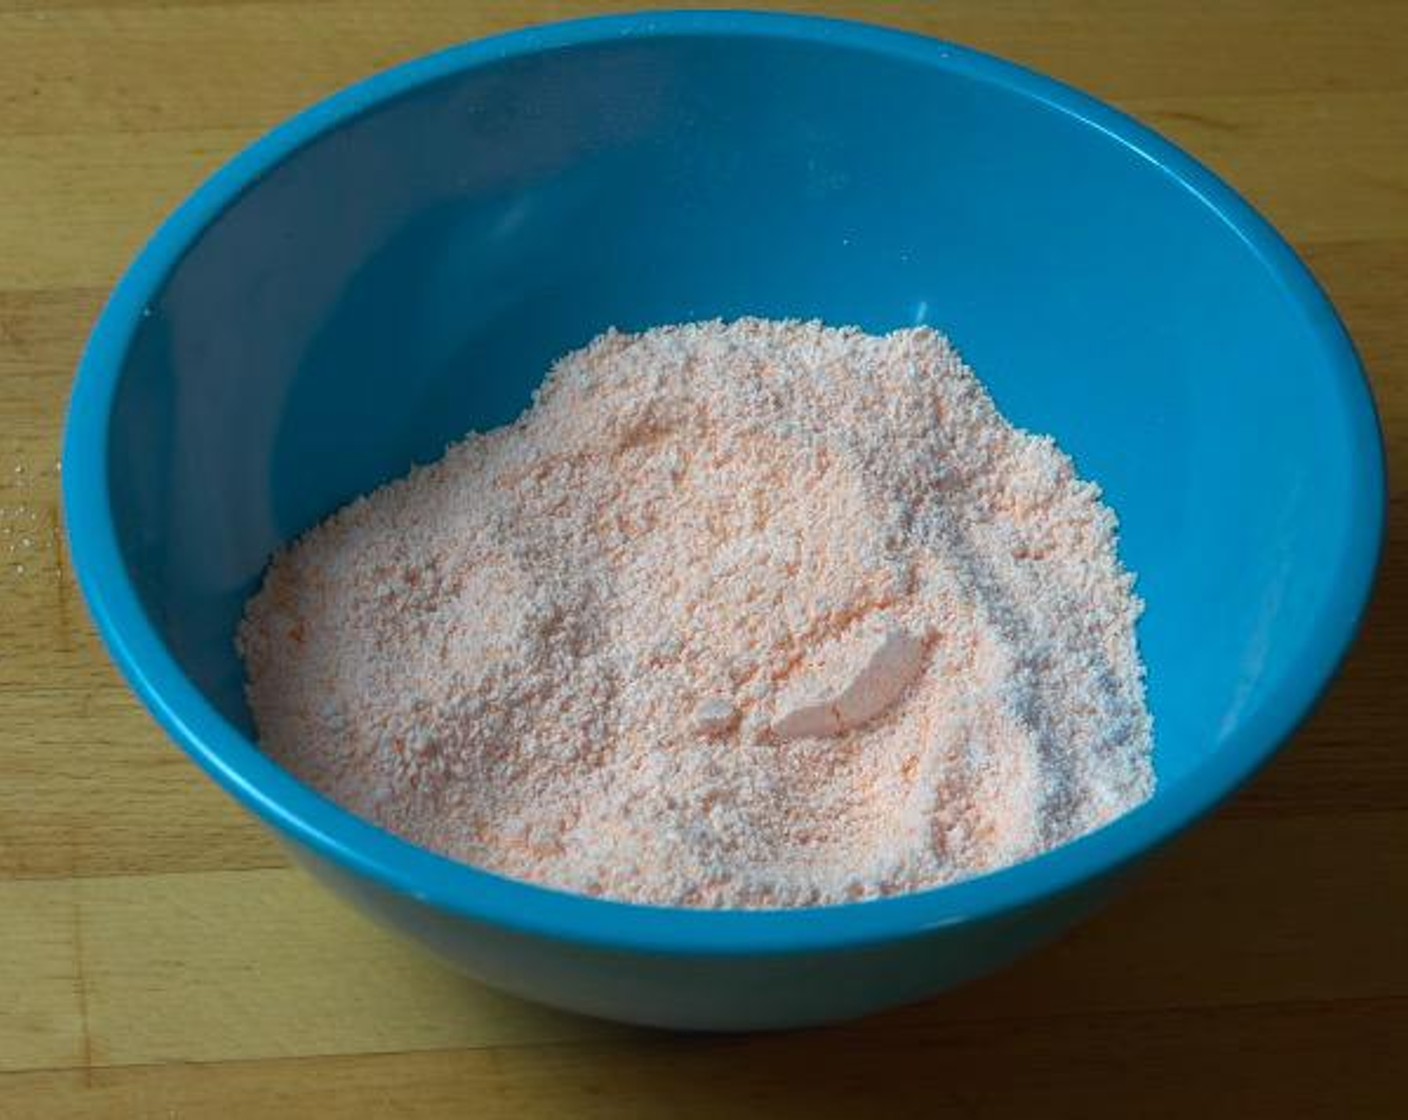 step 1 In a small mixing bowl, sift in Powdered Confectioners Sugar (1/3 cup) and Baking Soda (1 Tbsp). Add Citric Acid (1 Tbsp) and Any Flavor of Flavored Gelatin (3/4 cup). Mix until combined.